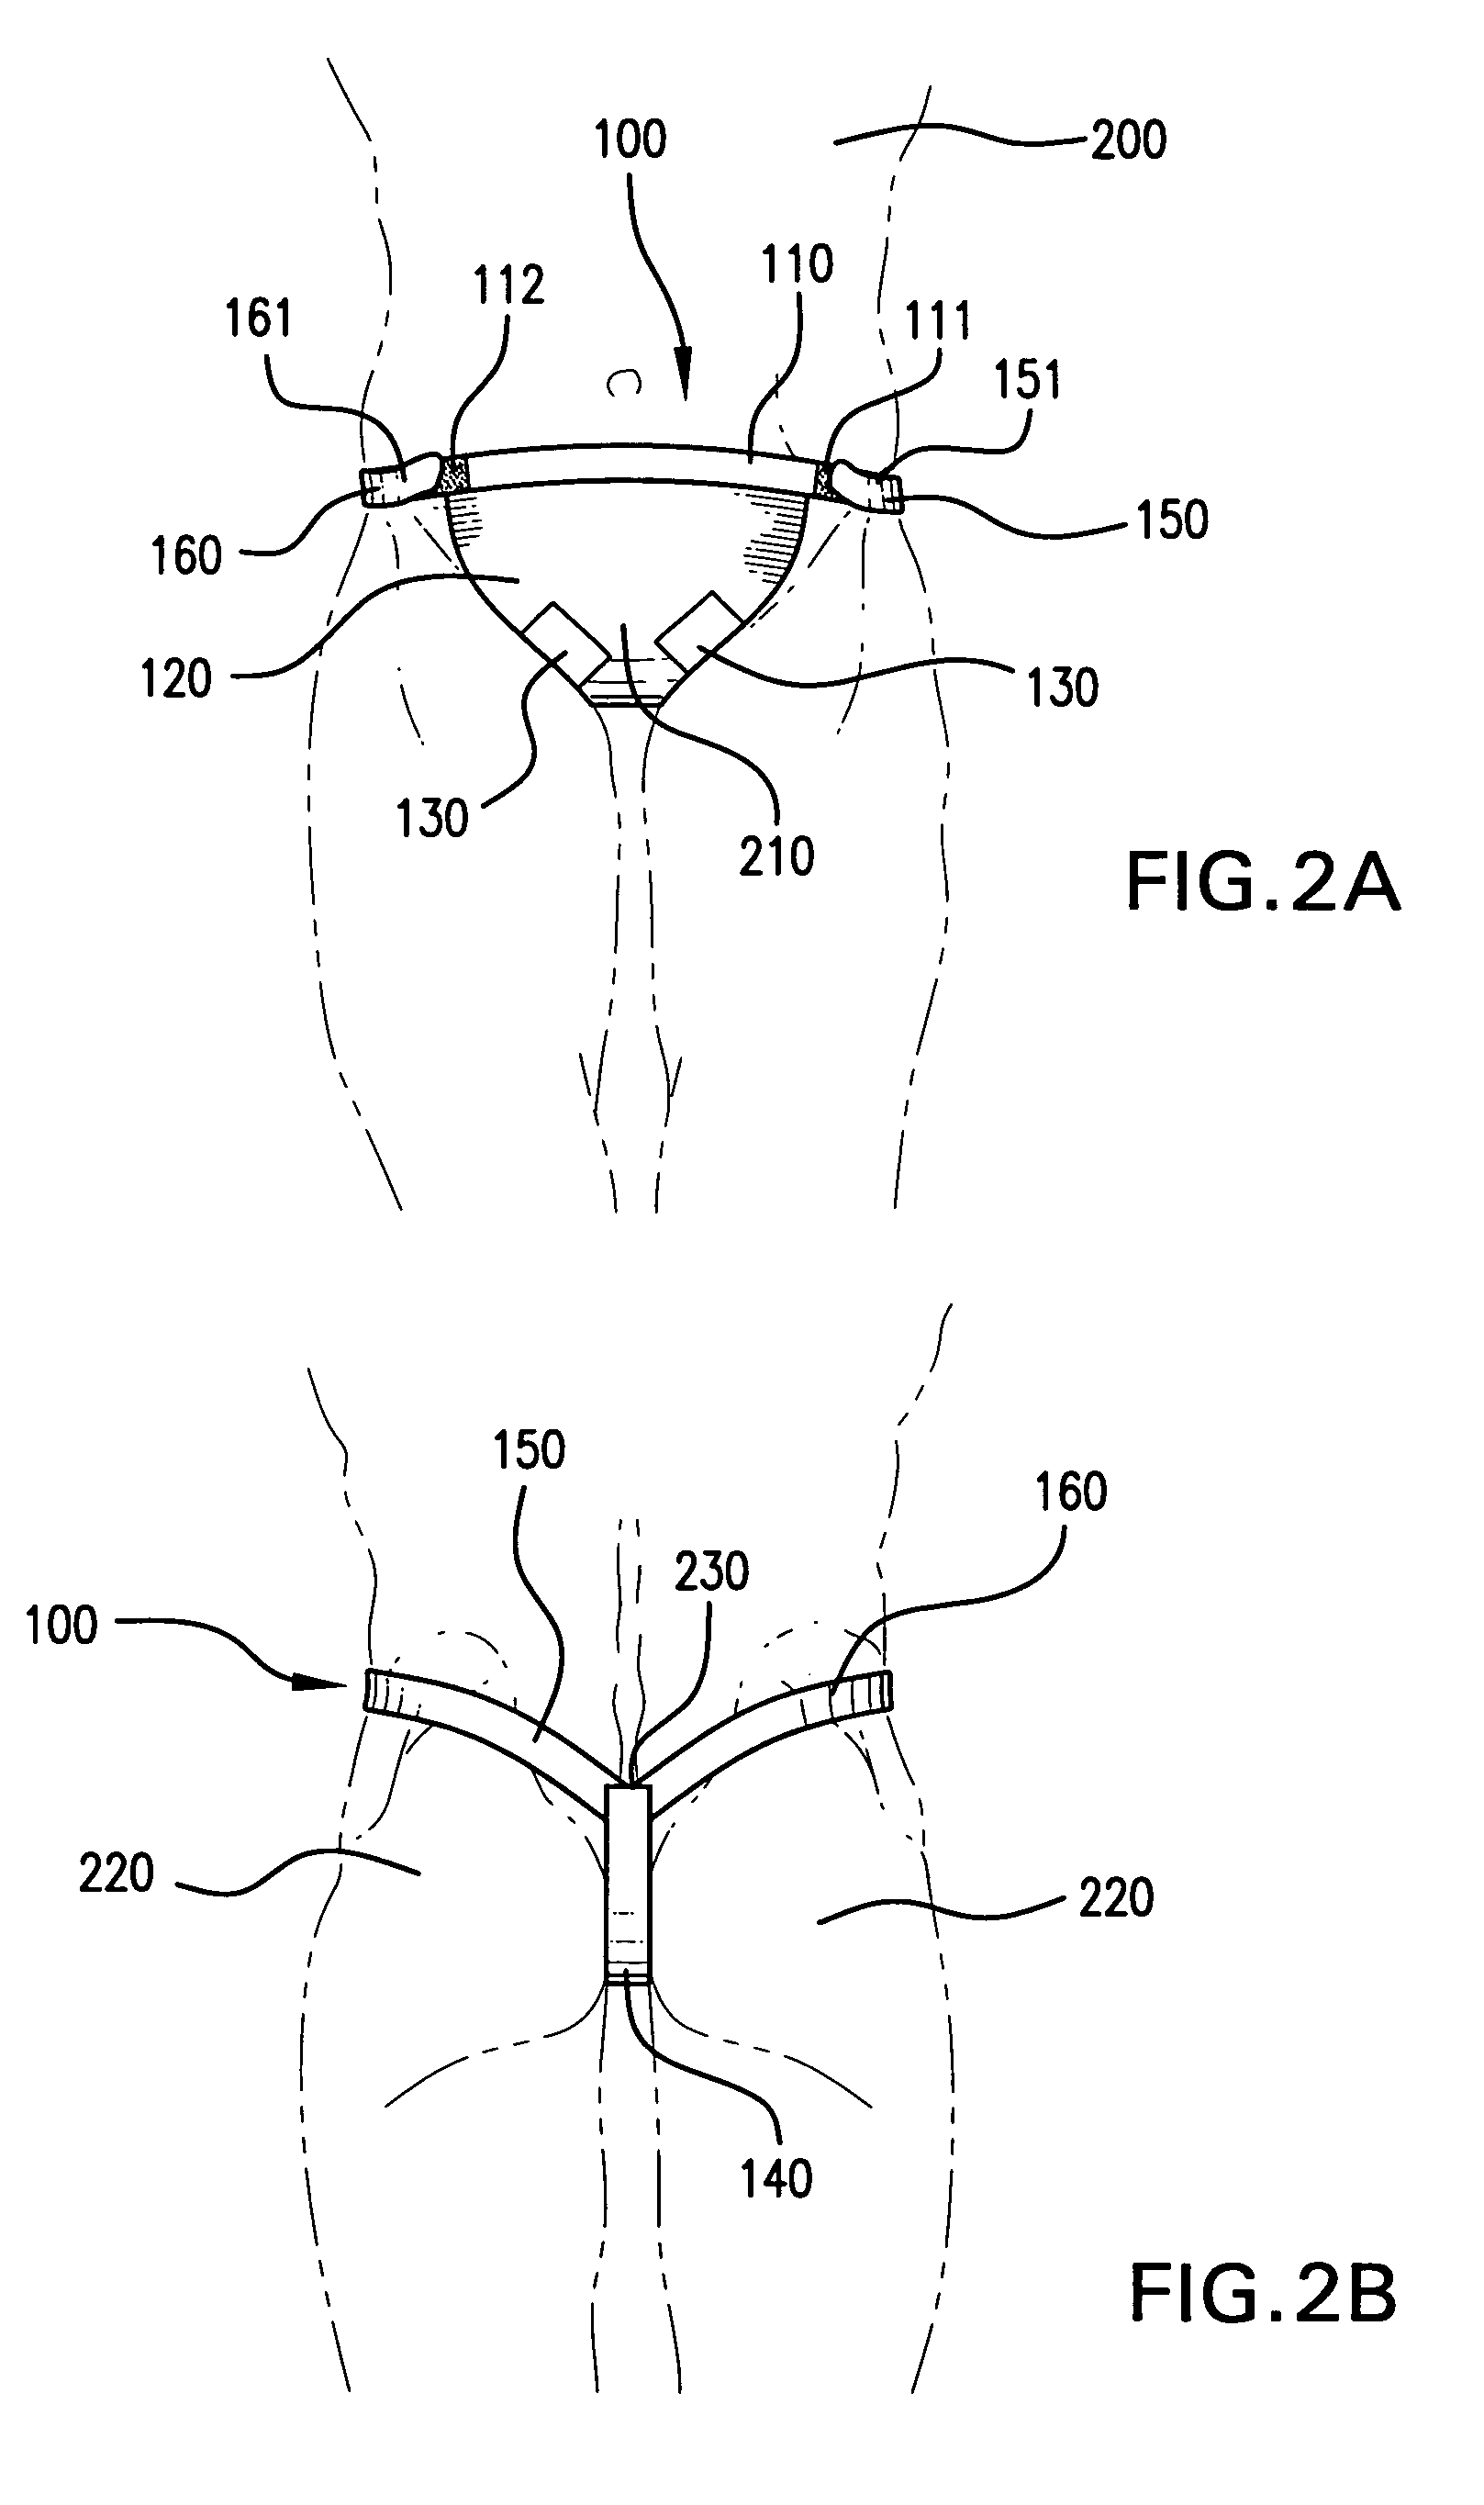 Methods and apparati for the close application of therapeutic and other devices to the pelvic area